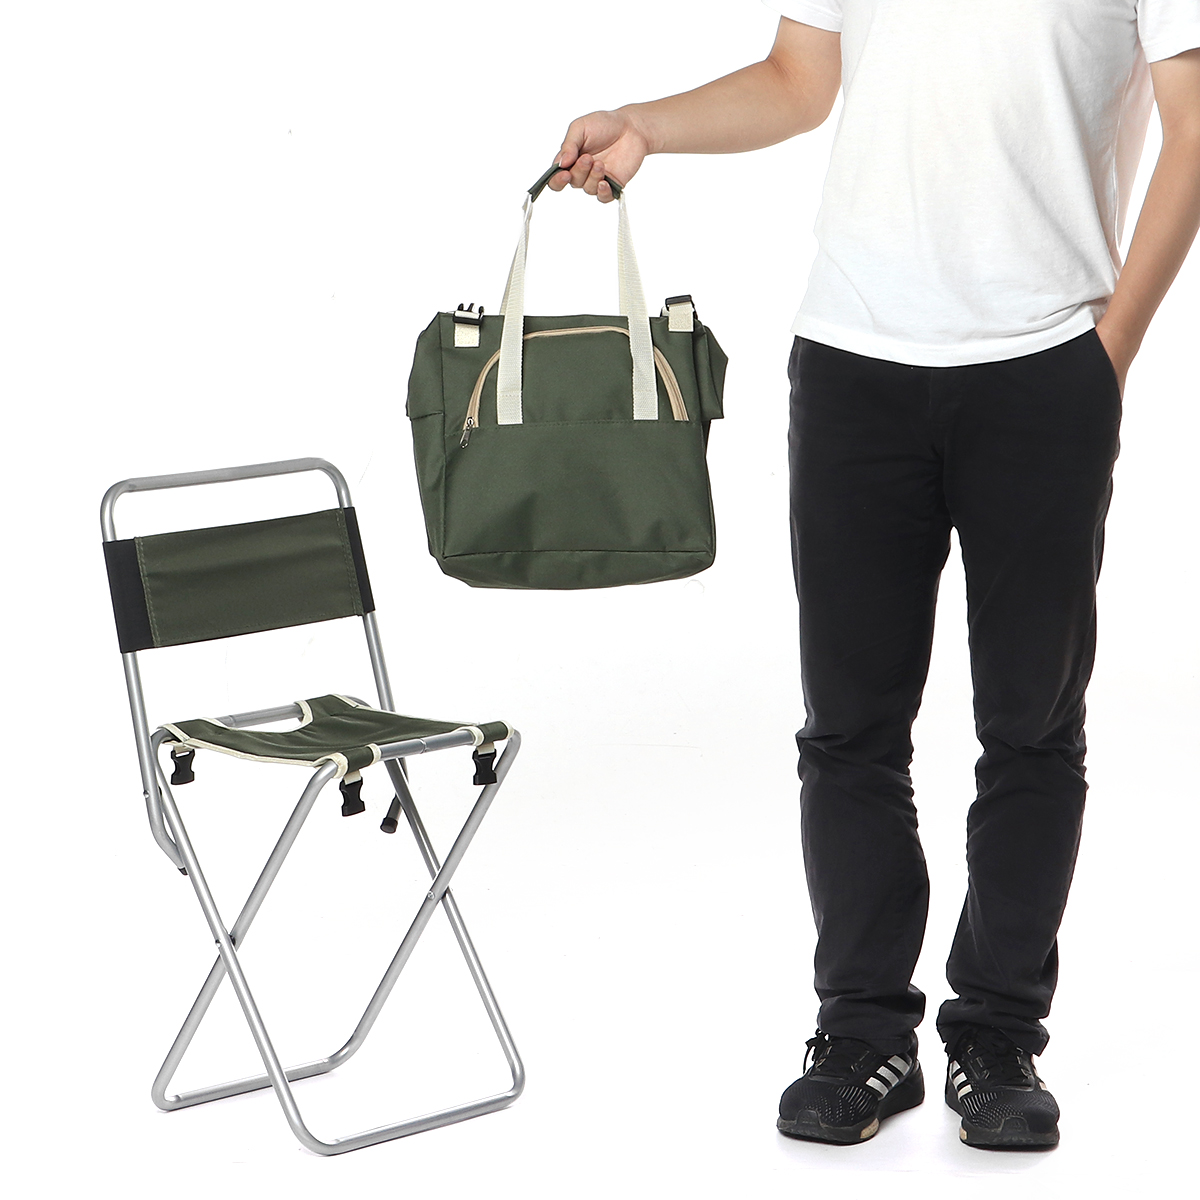 Portable-Folding-Fishing-Chair-Hiking-Camping-Storage-Backpack-Gardening-Tools-Storage-Oxford-Bags-S-1753364-3